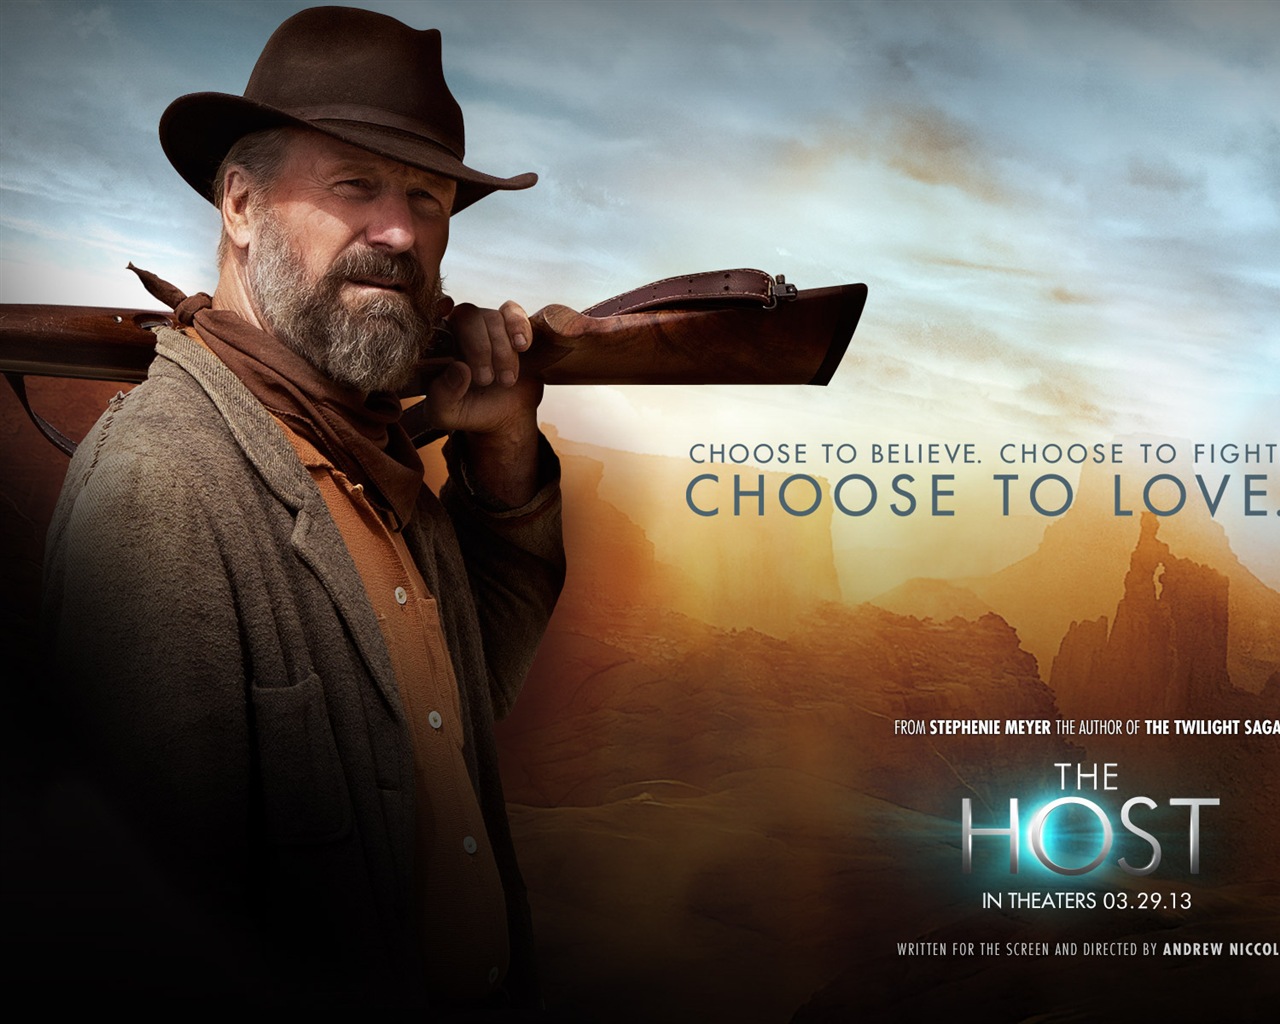 The Host 2013 movie HD wallpapers #11 - 1280x1024